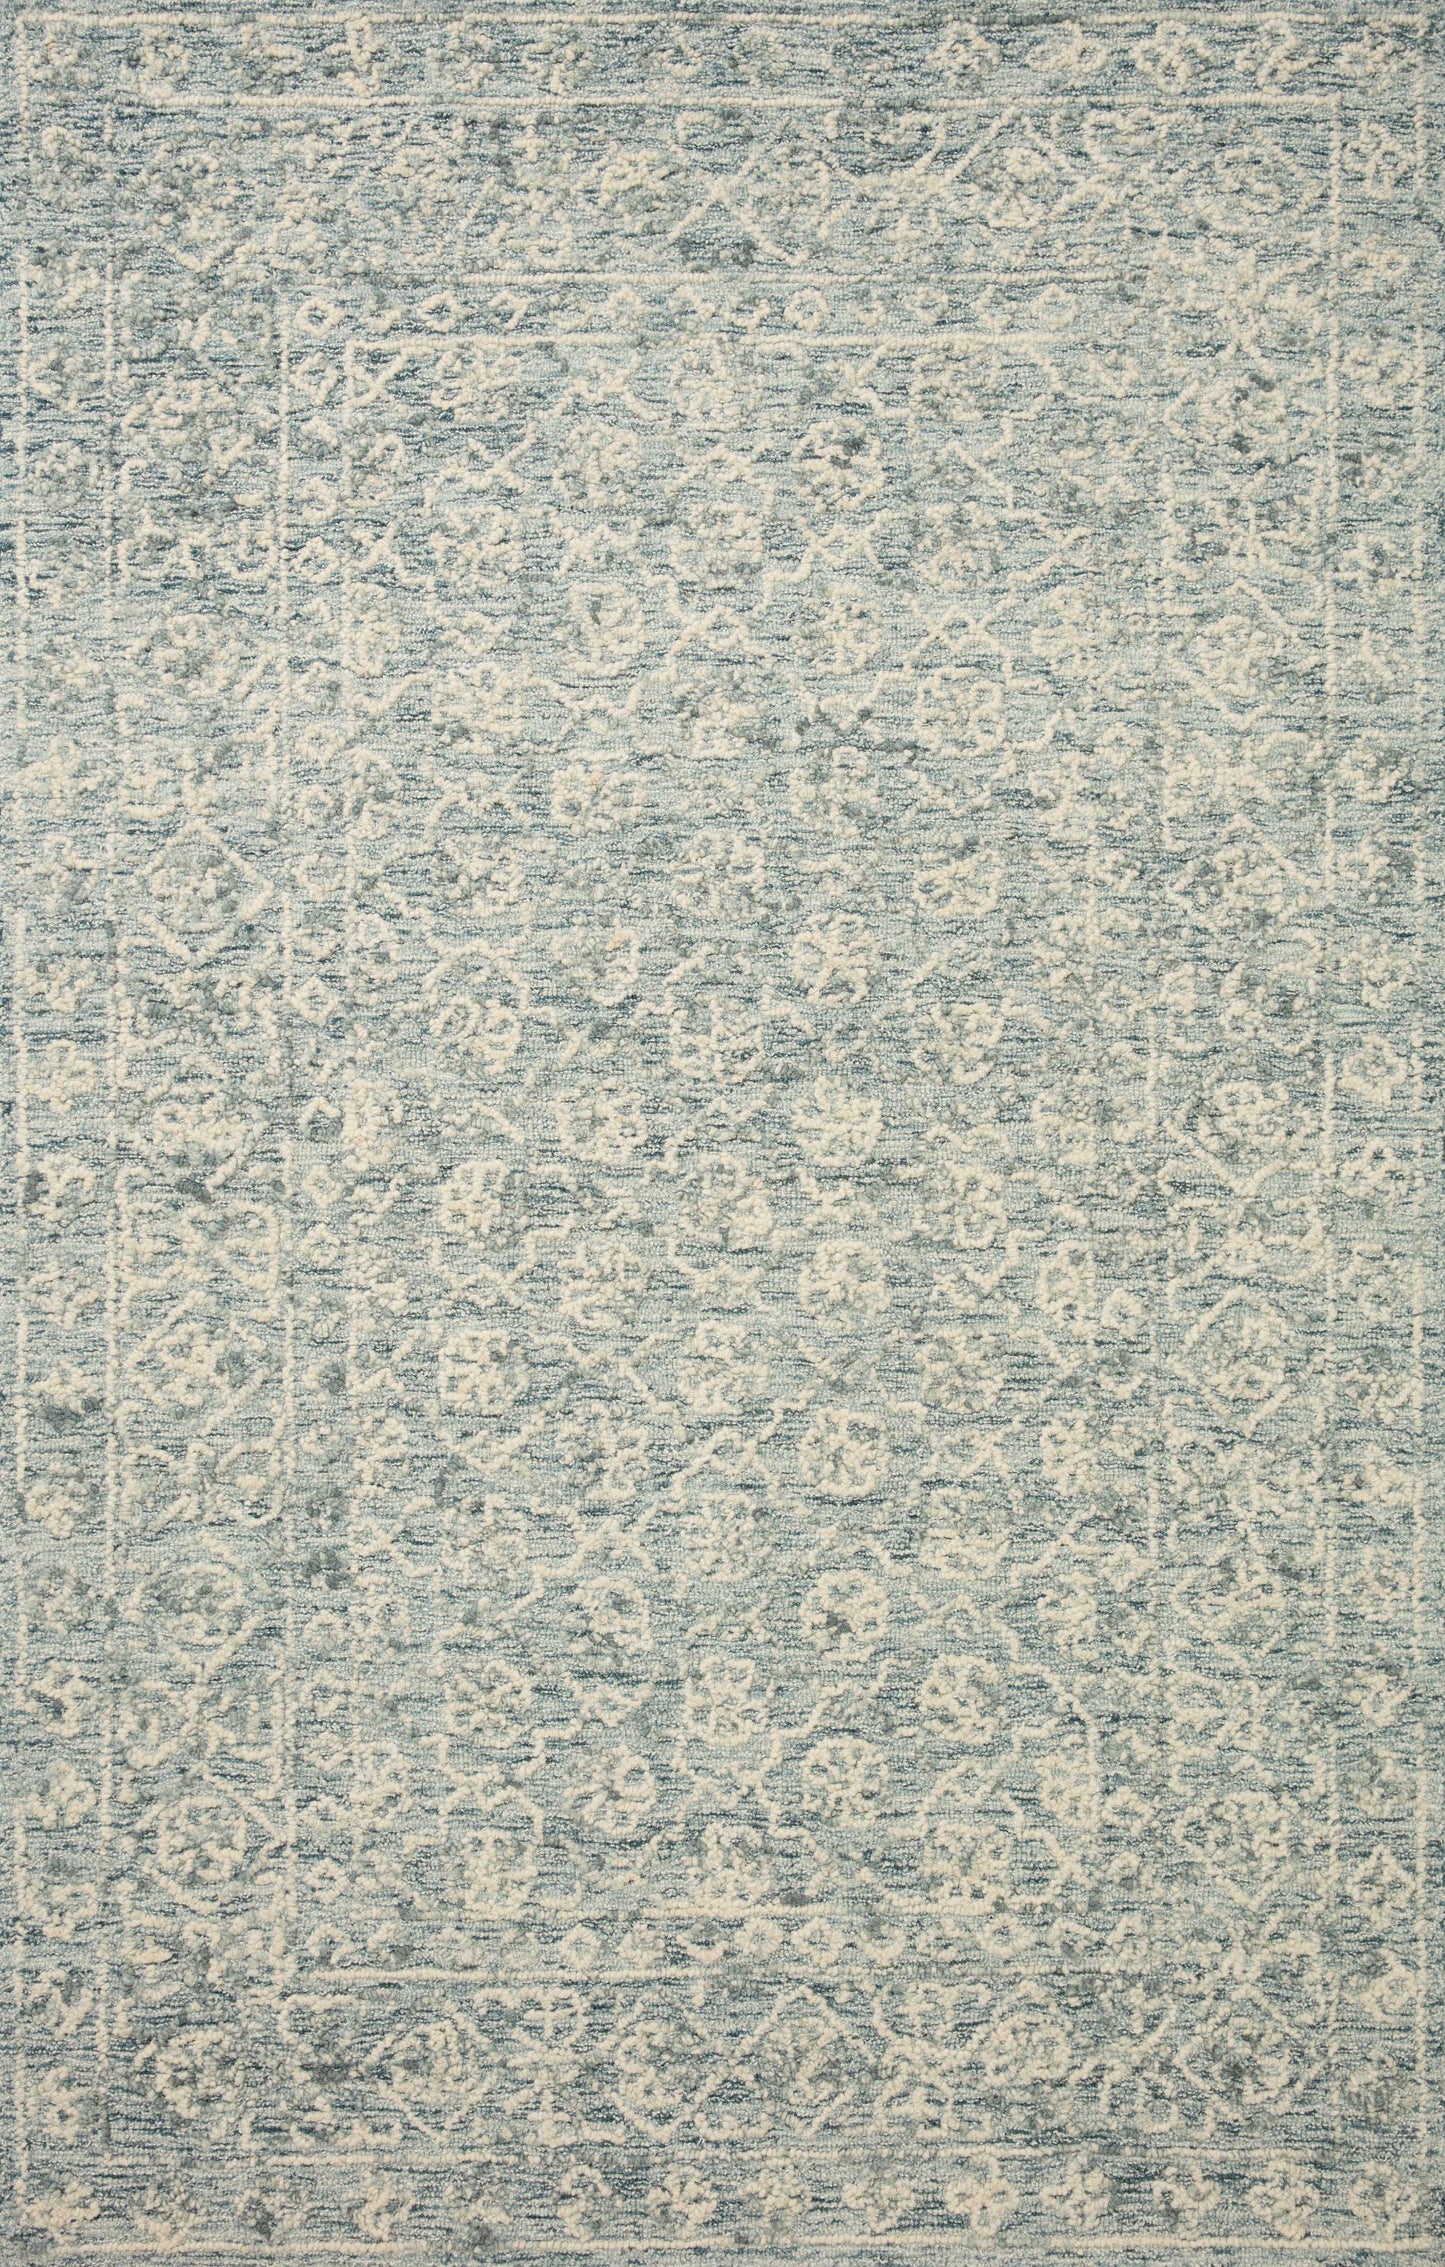 A picture of Loloi's Cecelia rug, in style CEC-01, color Ocean / Ivory